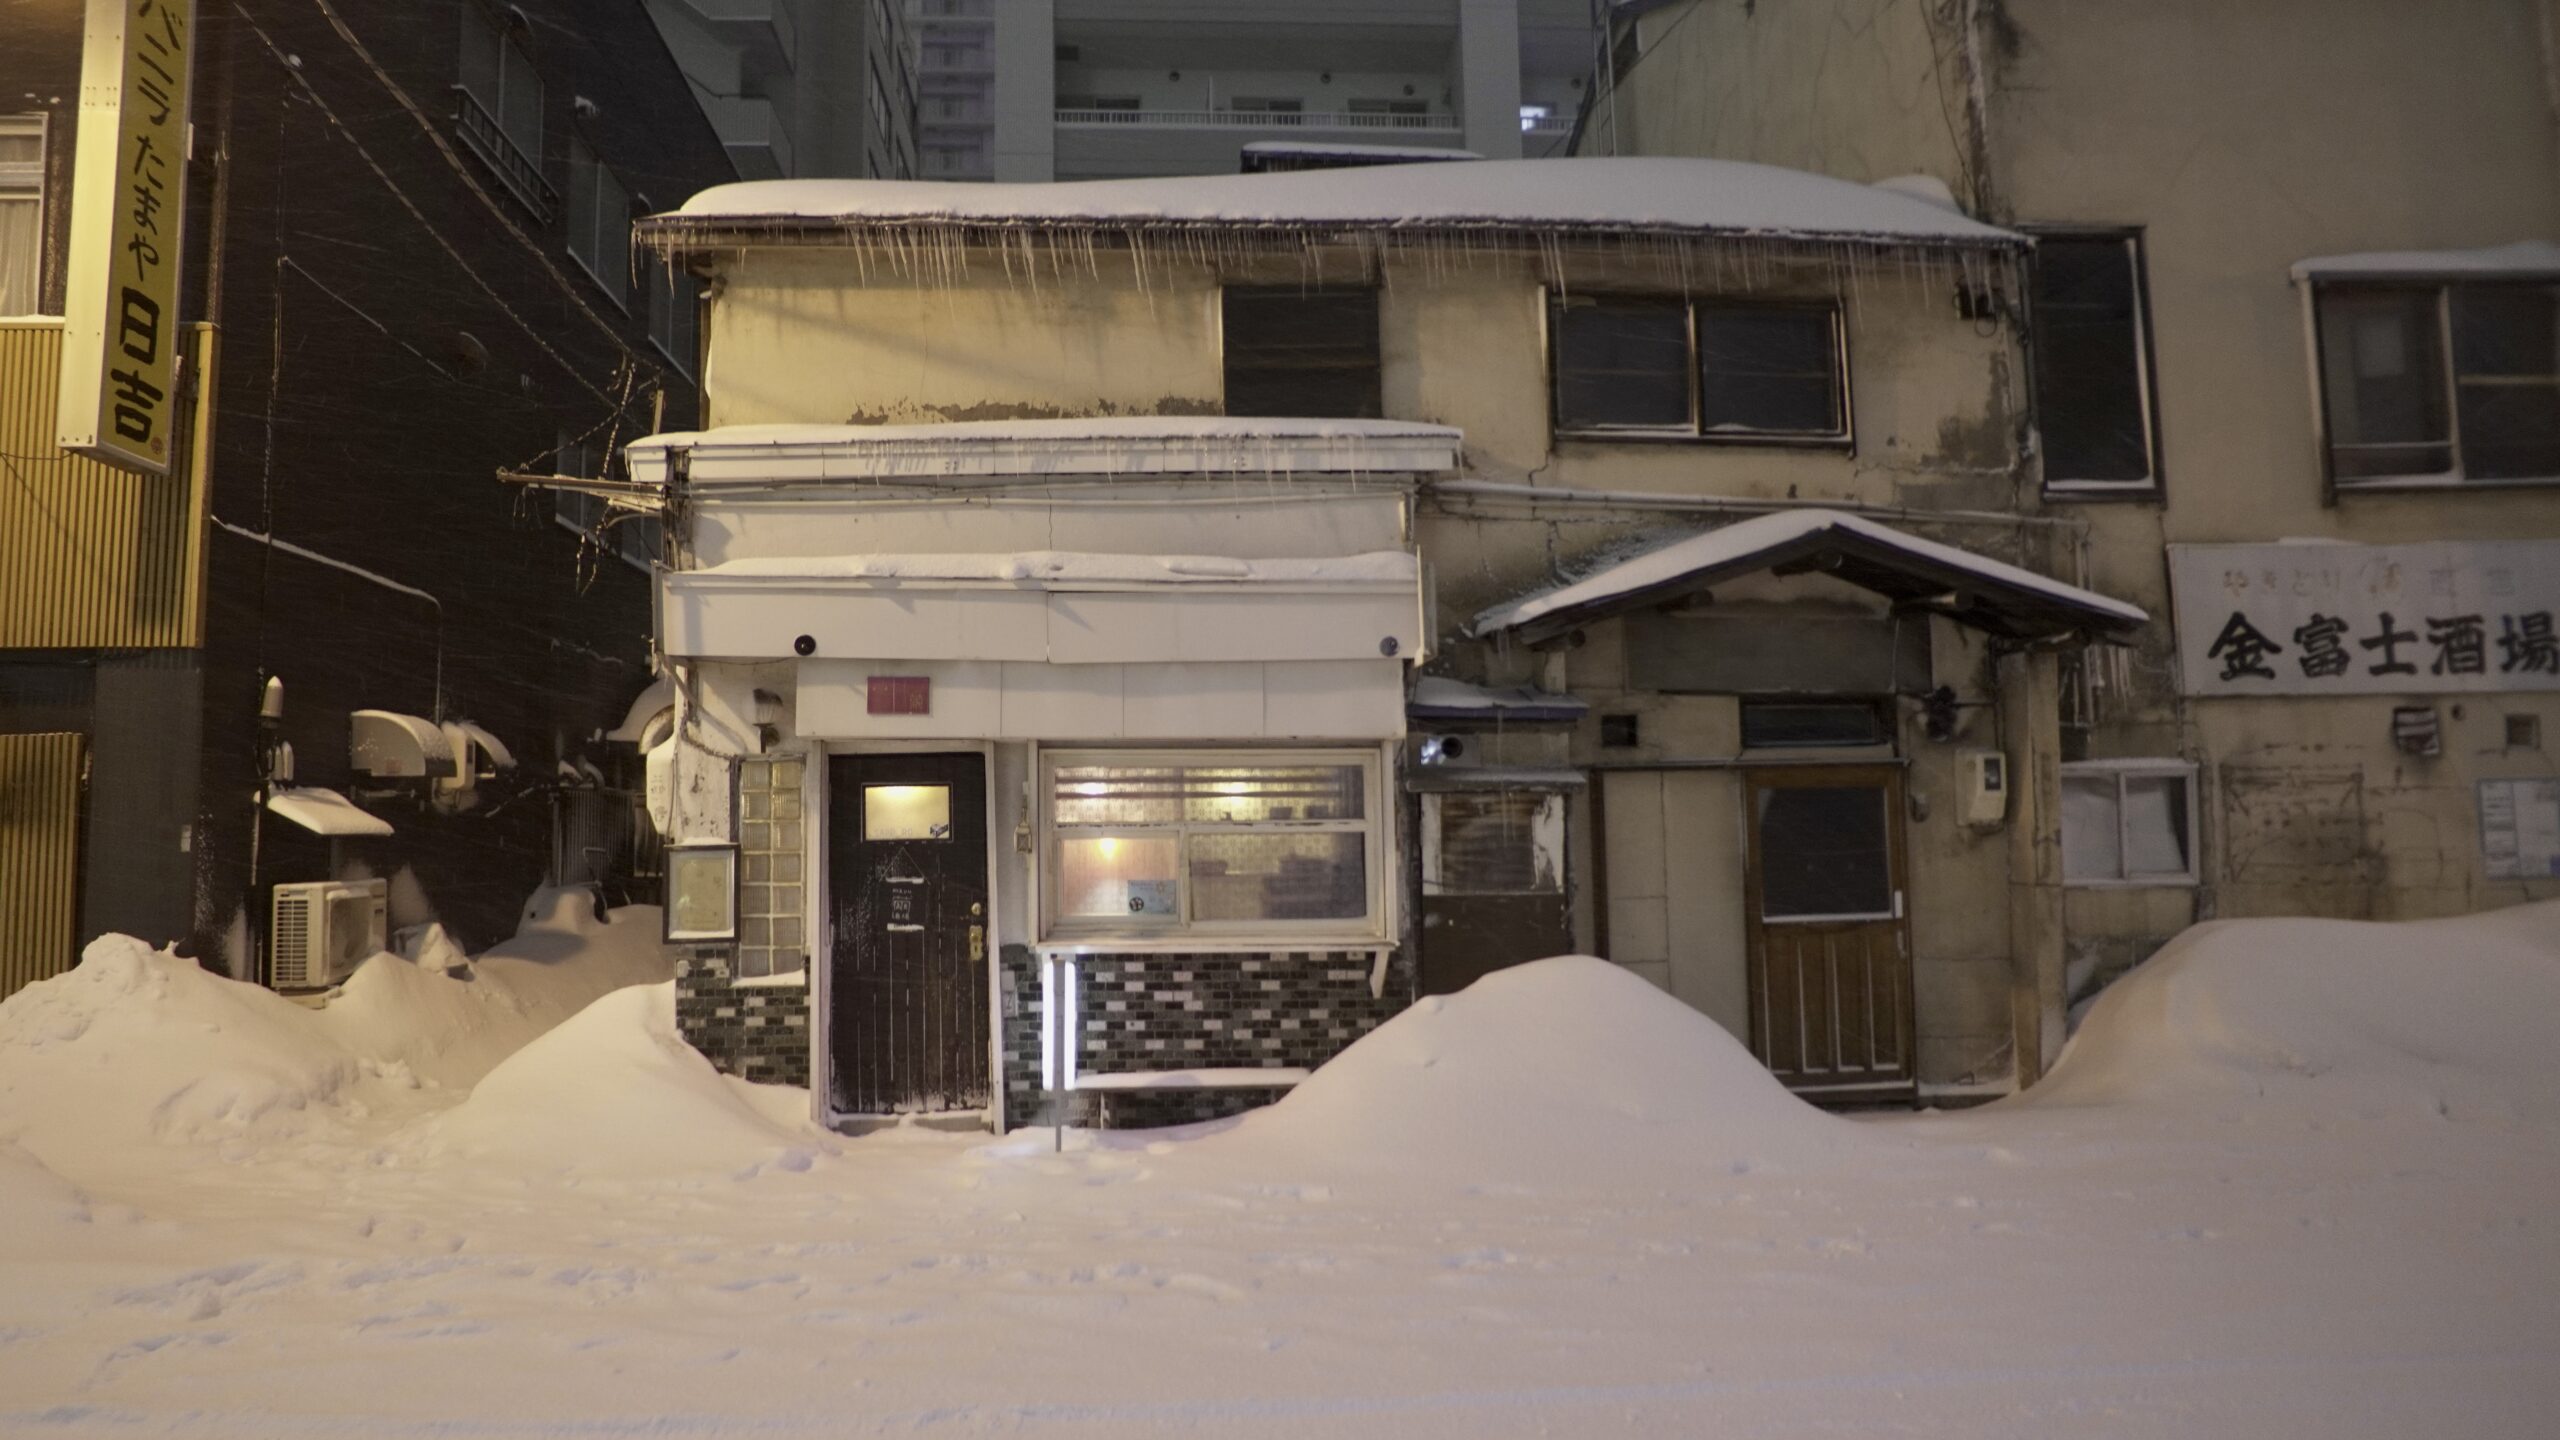 A local bar in the snow